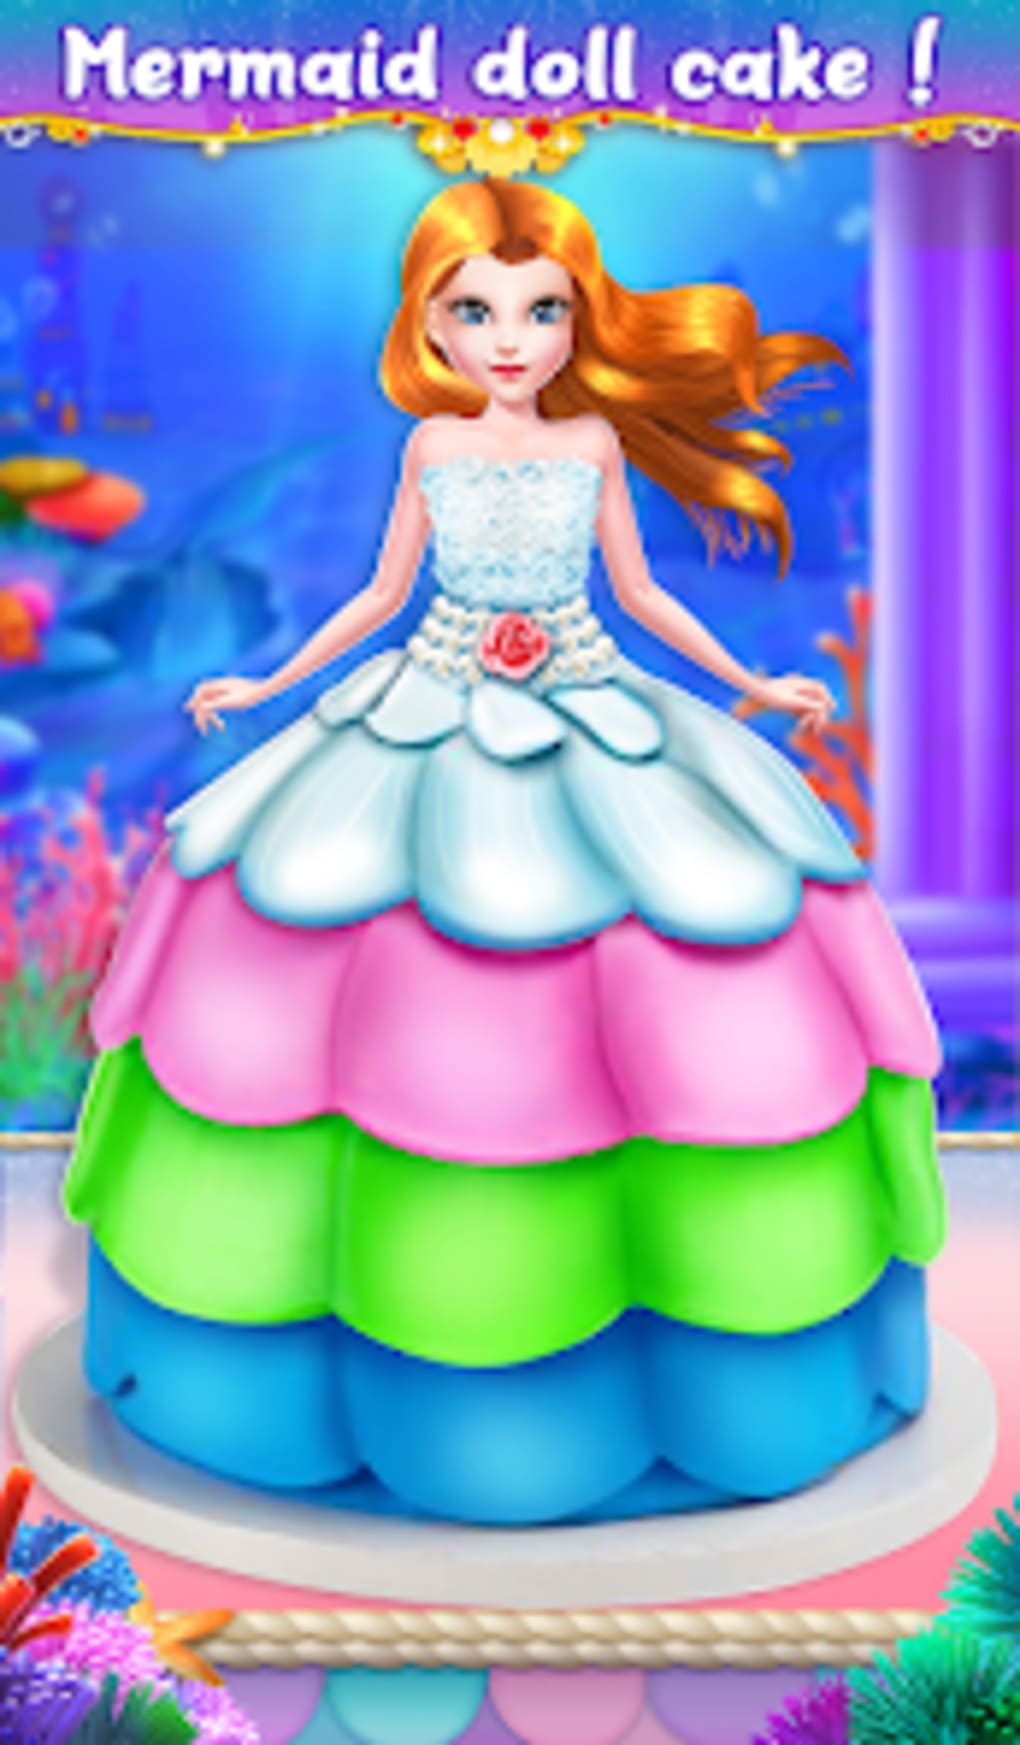 My Bakery Empire - Bake, Decorate & Serve Cakes - Fun Tabtale Kids Games  For Girls | Cake... | Kids games for girls, Cake games, Games for girls